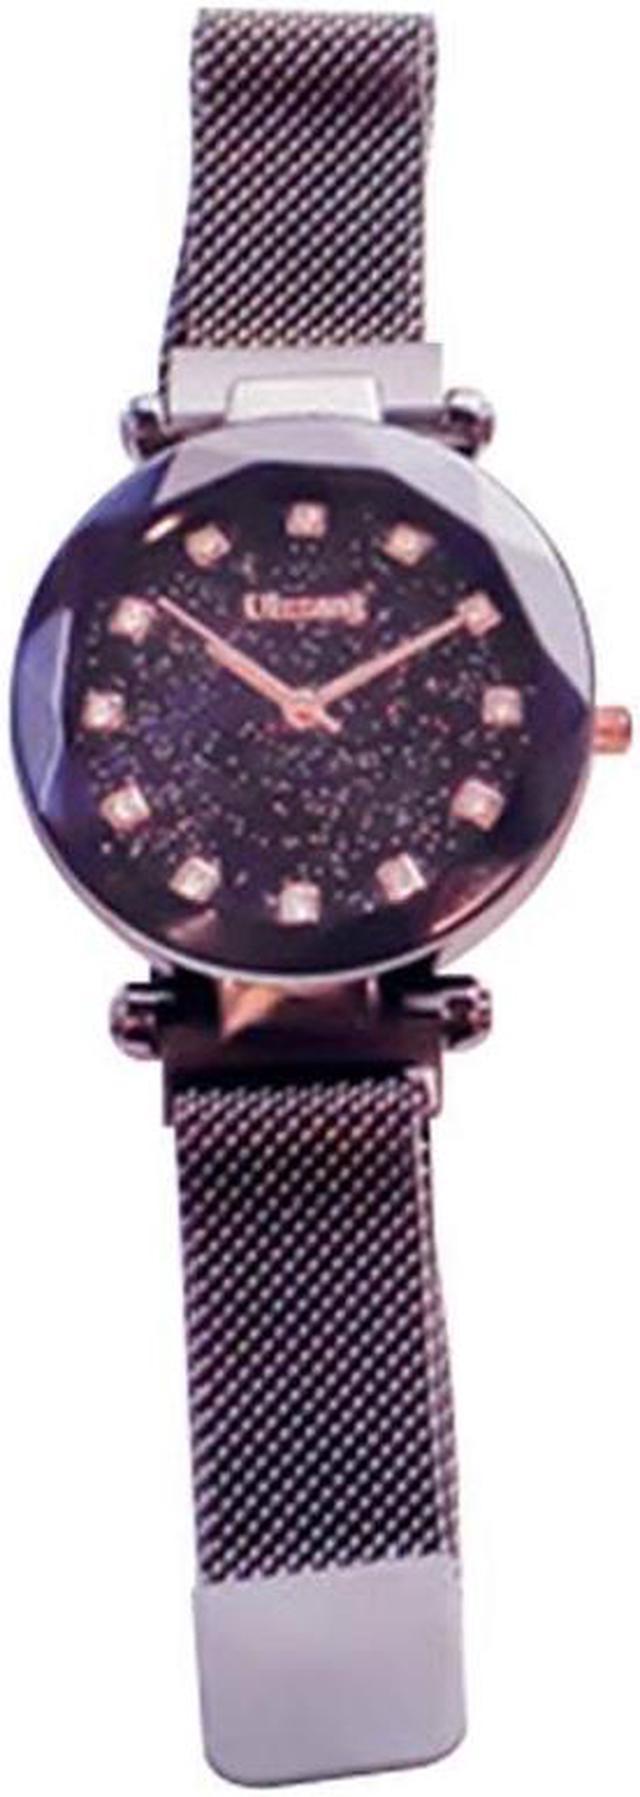 Indulge in Celestial Elegance with Our Exquisite Starry Sky Watch Set |  Beautiful watches, Watch setting, Bracelet watch